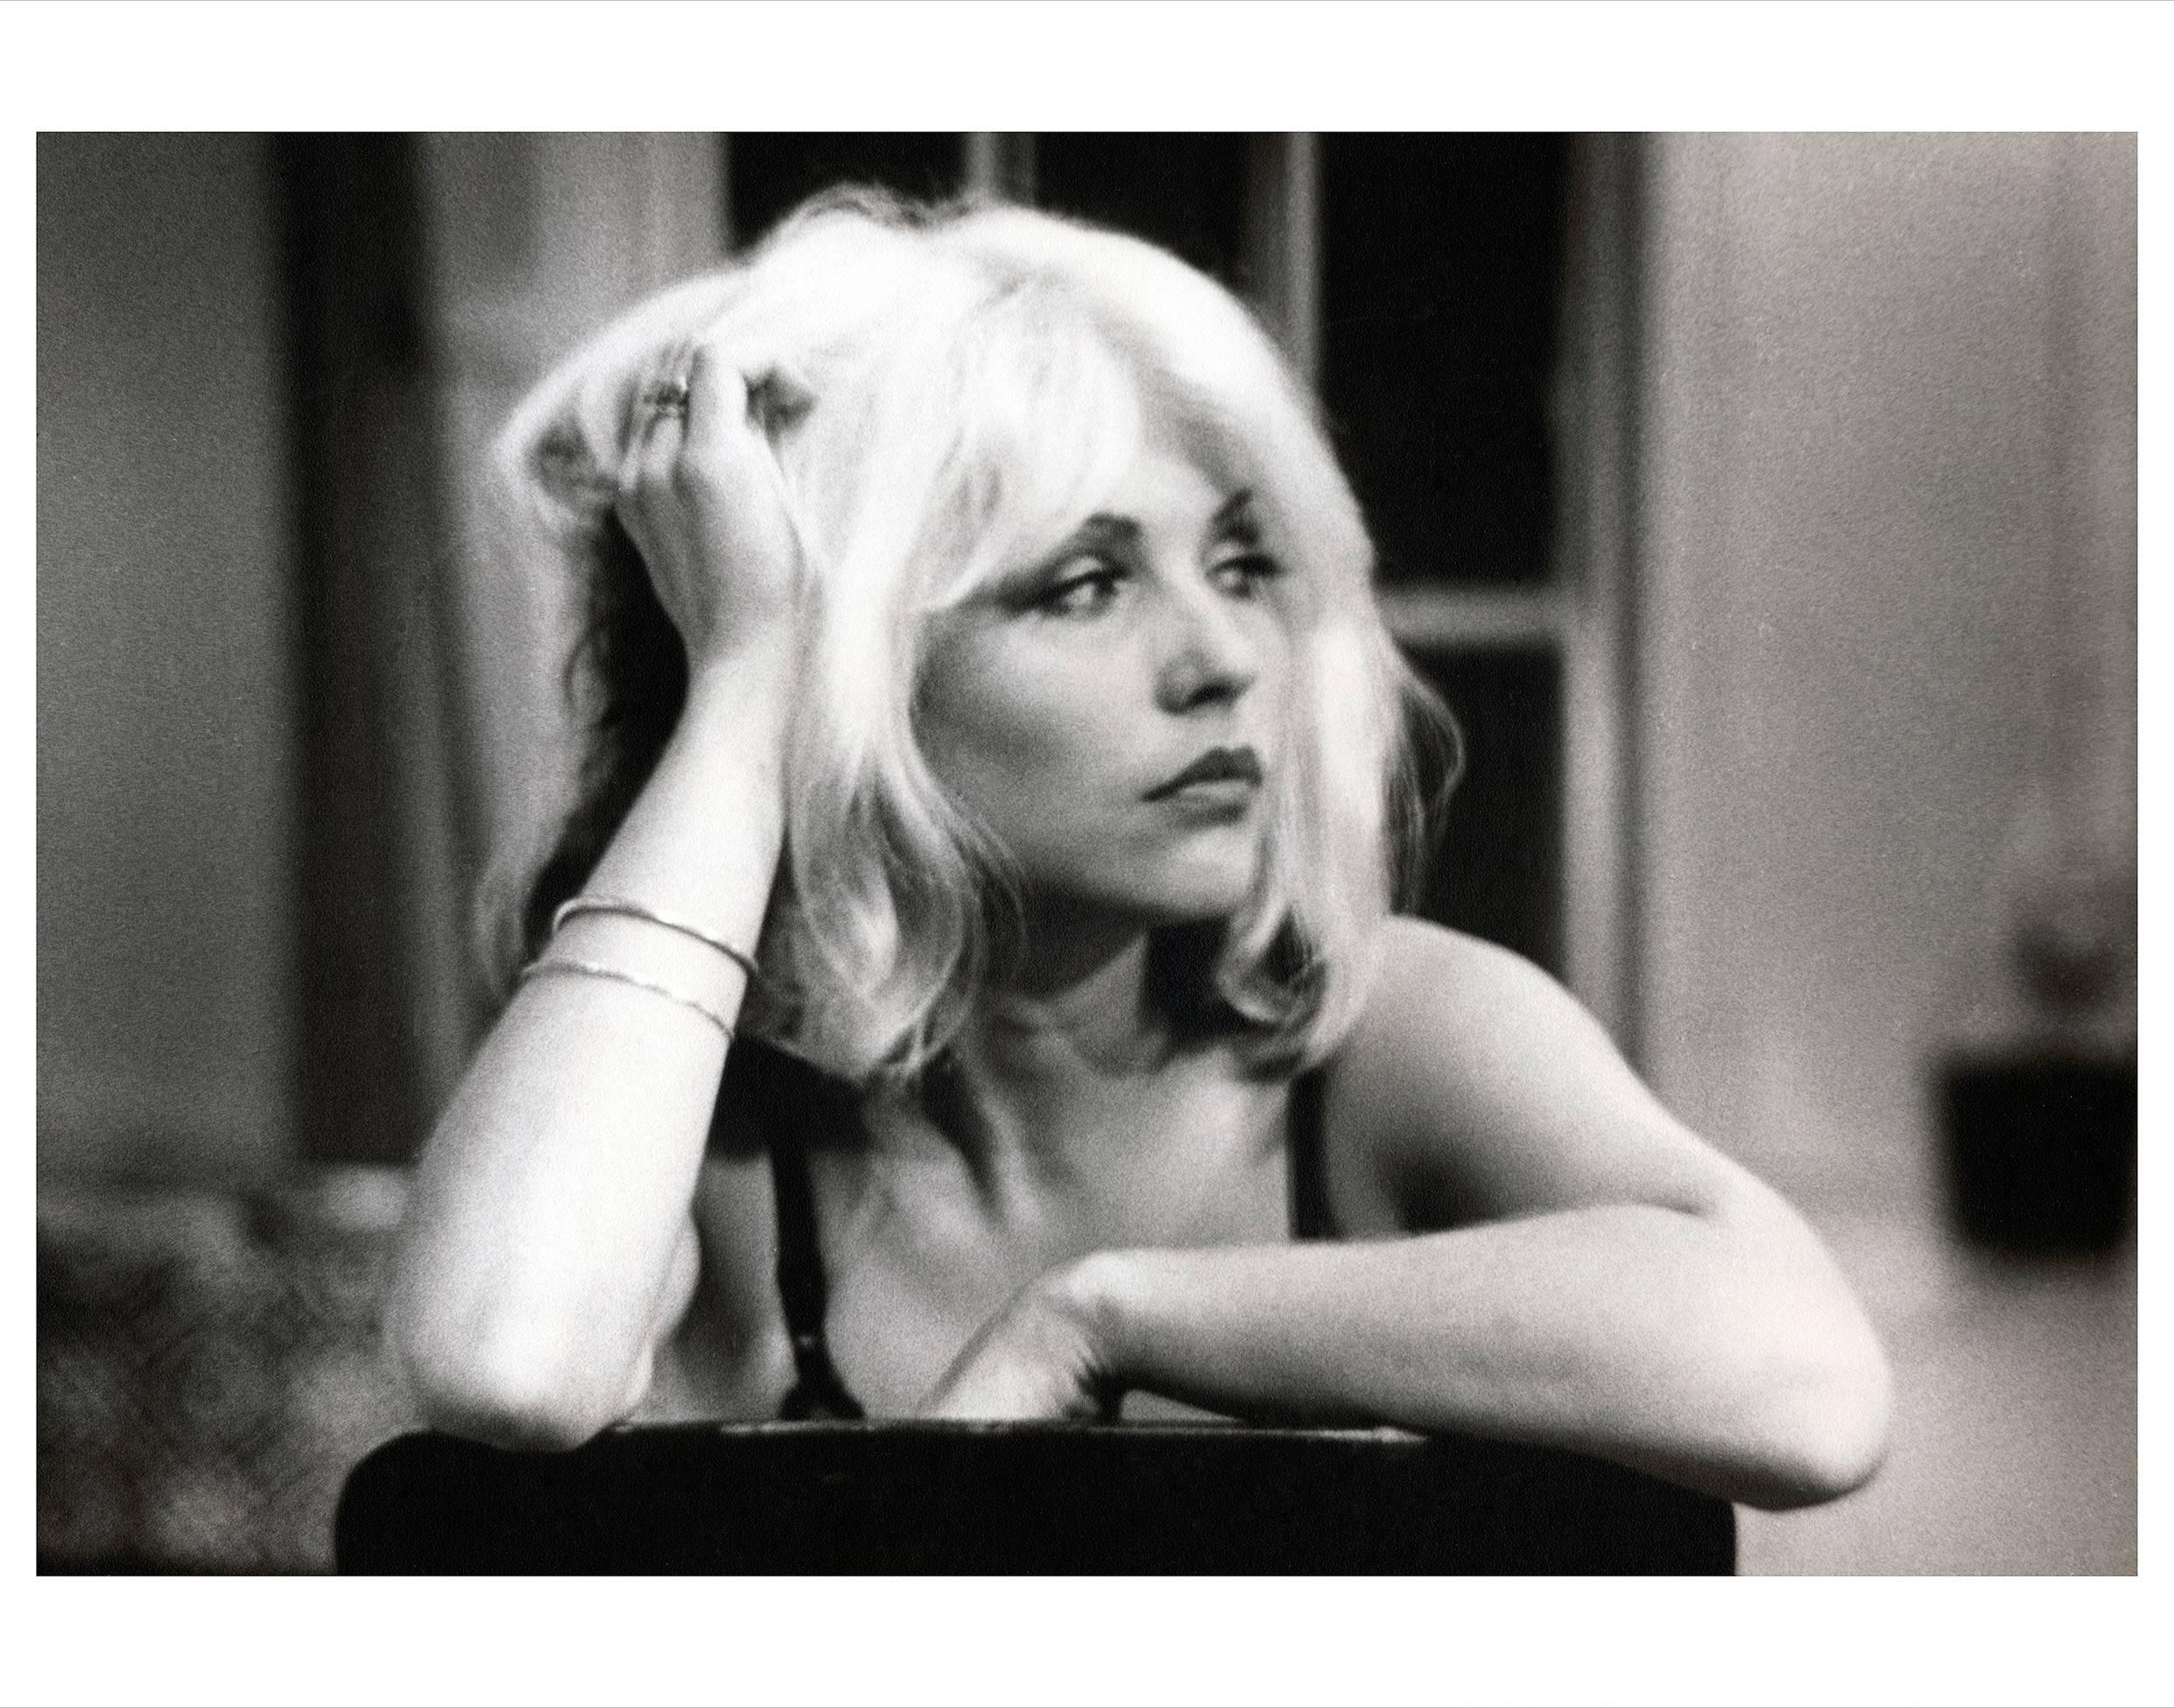 Fernando Natalici Black and White Photograph - Debbie Harry (on the set of Unmade Beds), New York, 1976